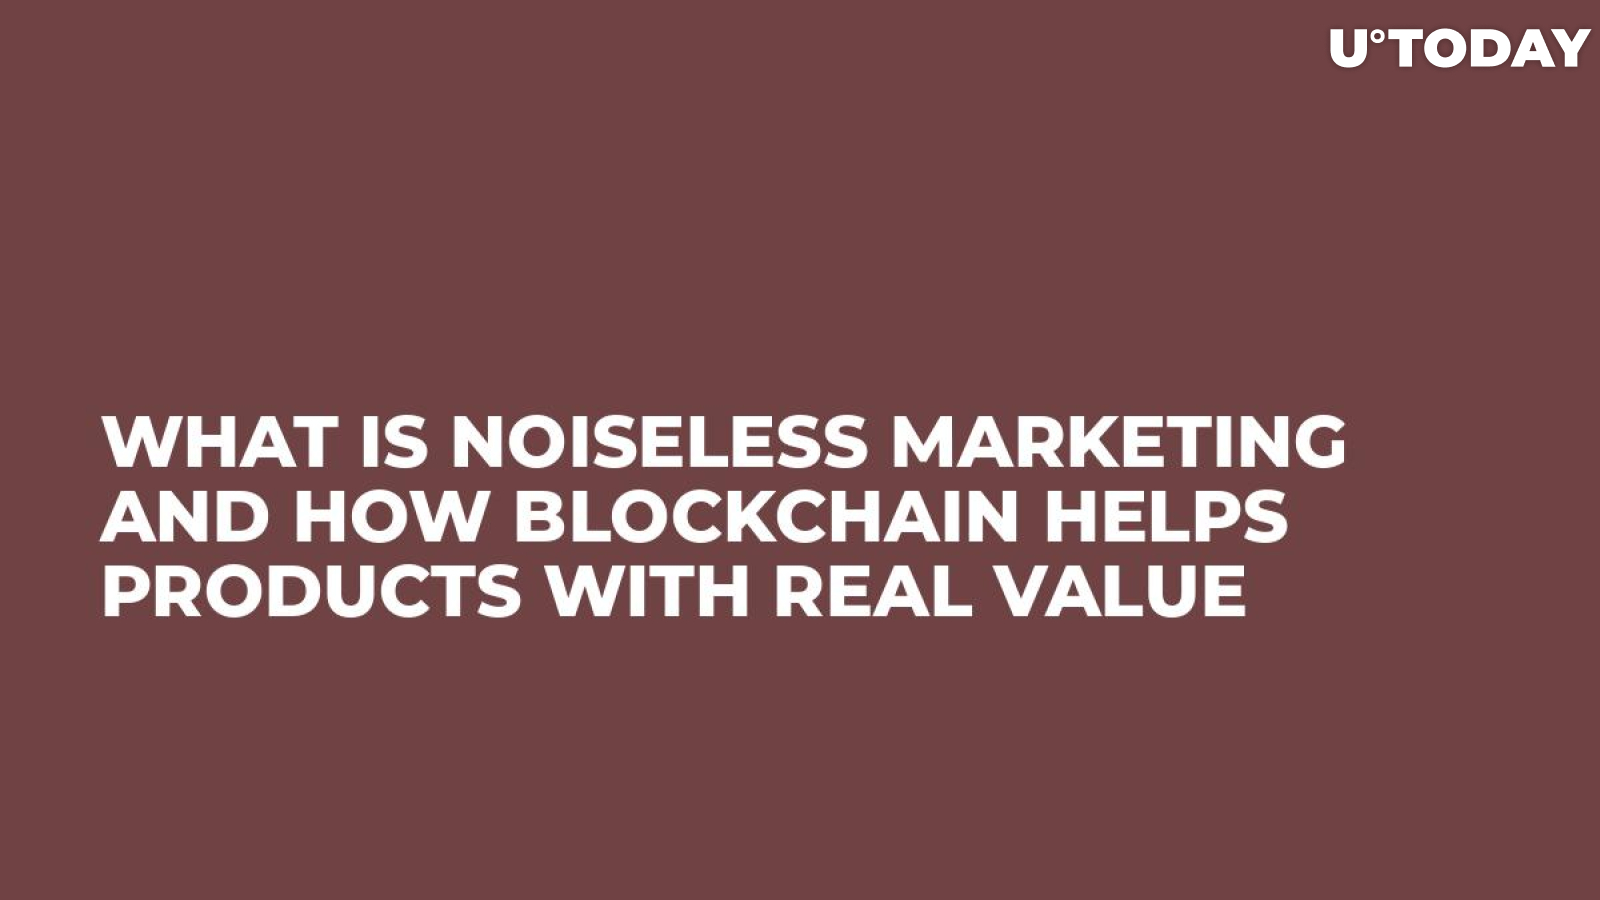 What is Noiseless Marketing and How Blockchain Helps Products With Real Value